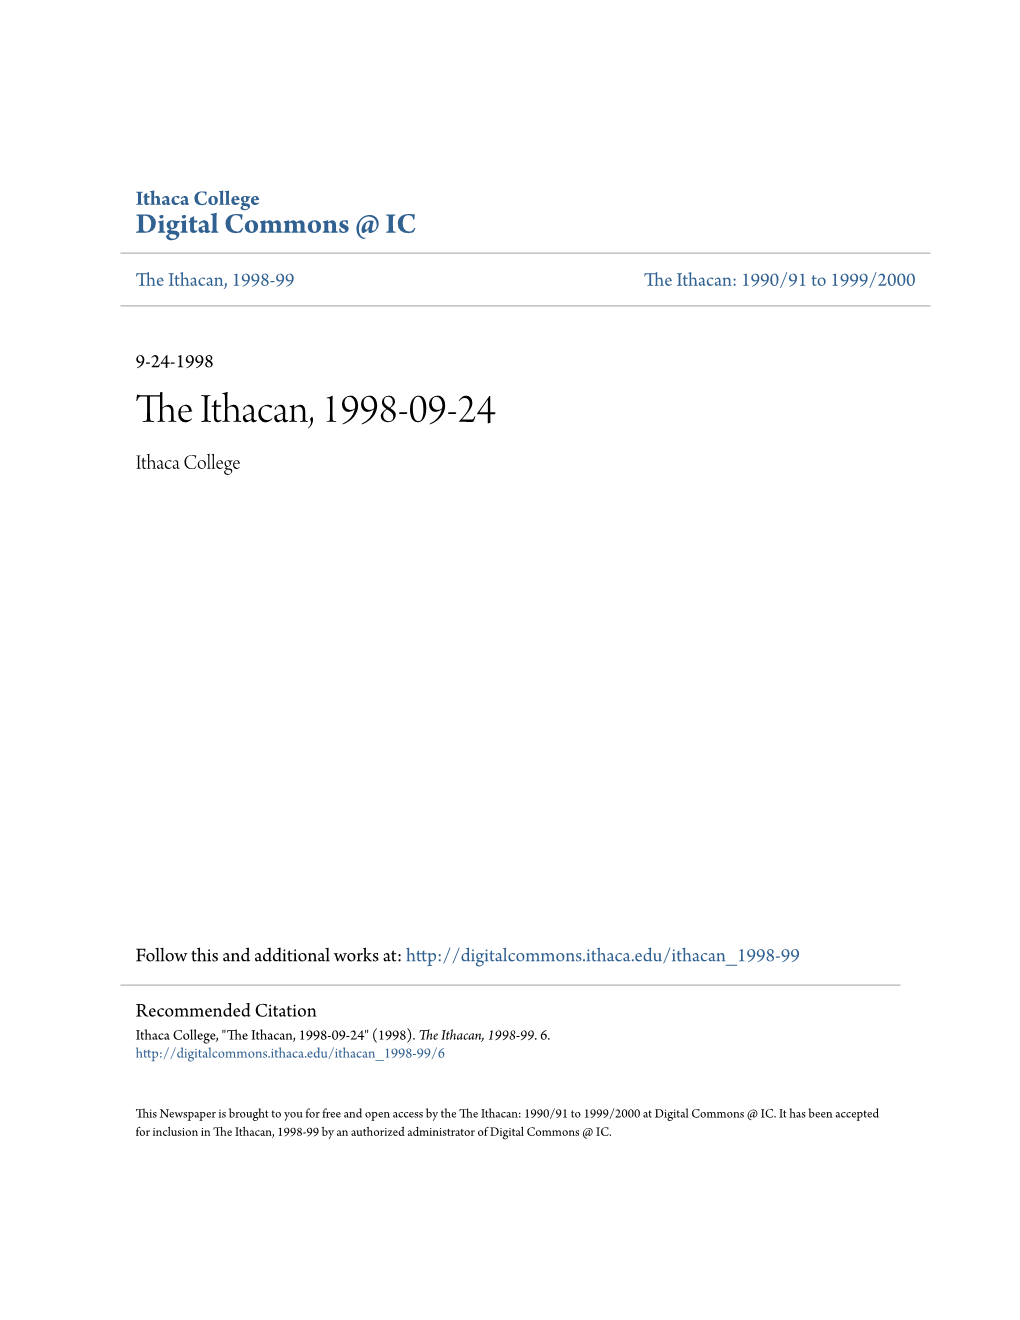 The Ithacan, 1998-09-24